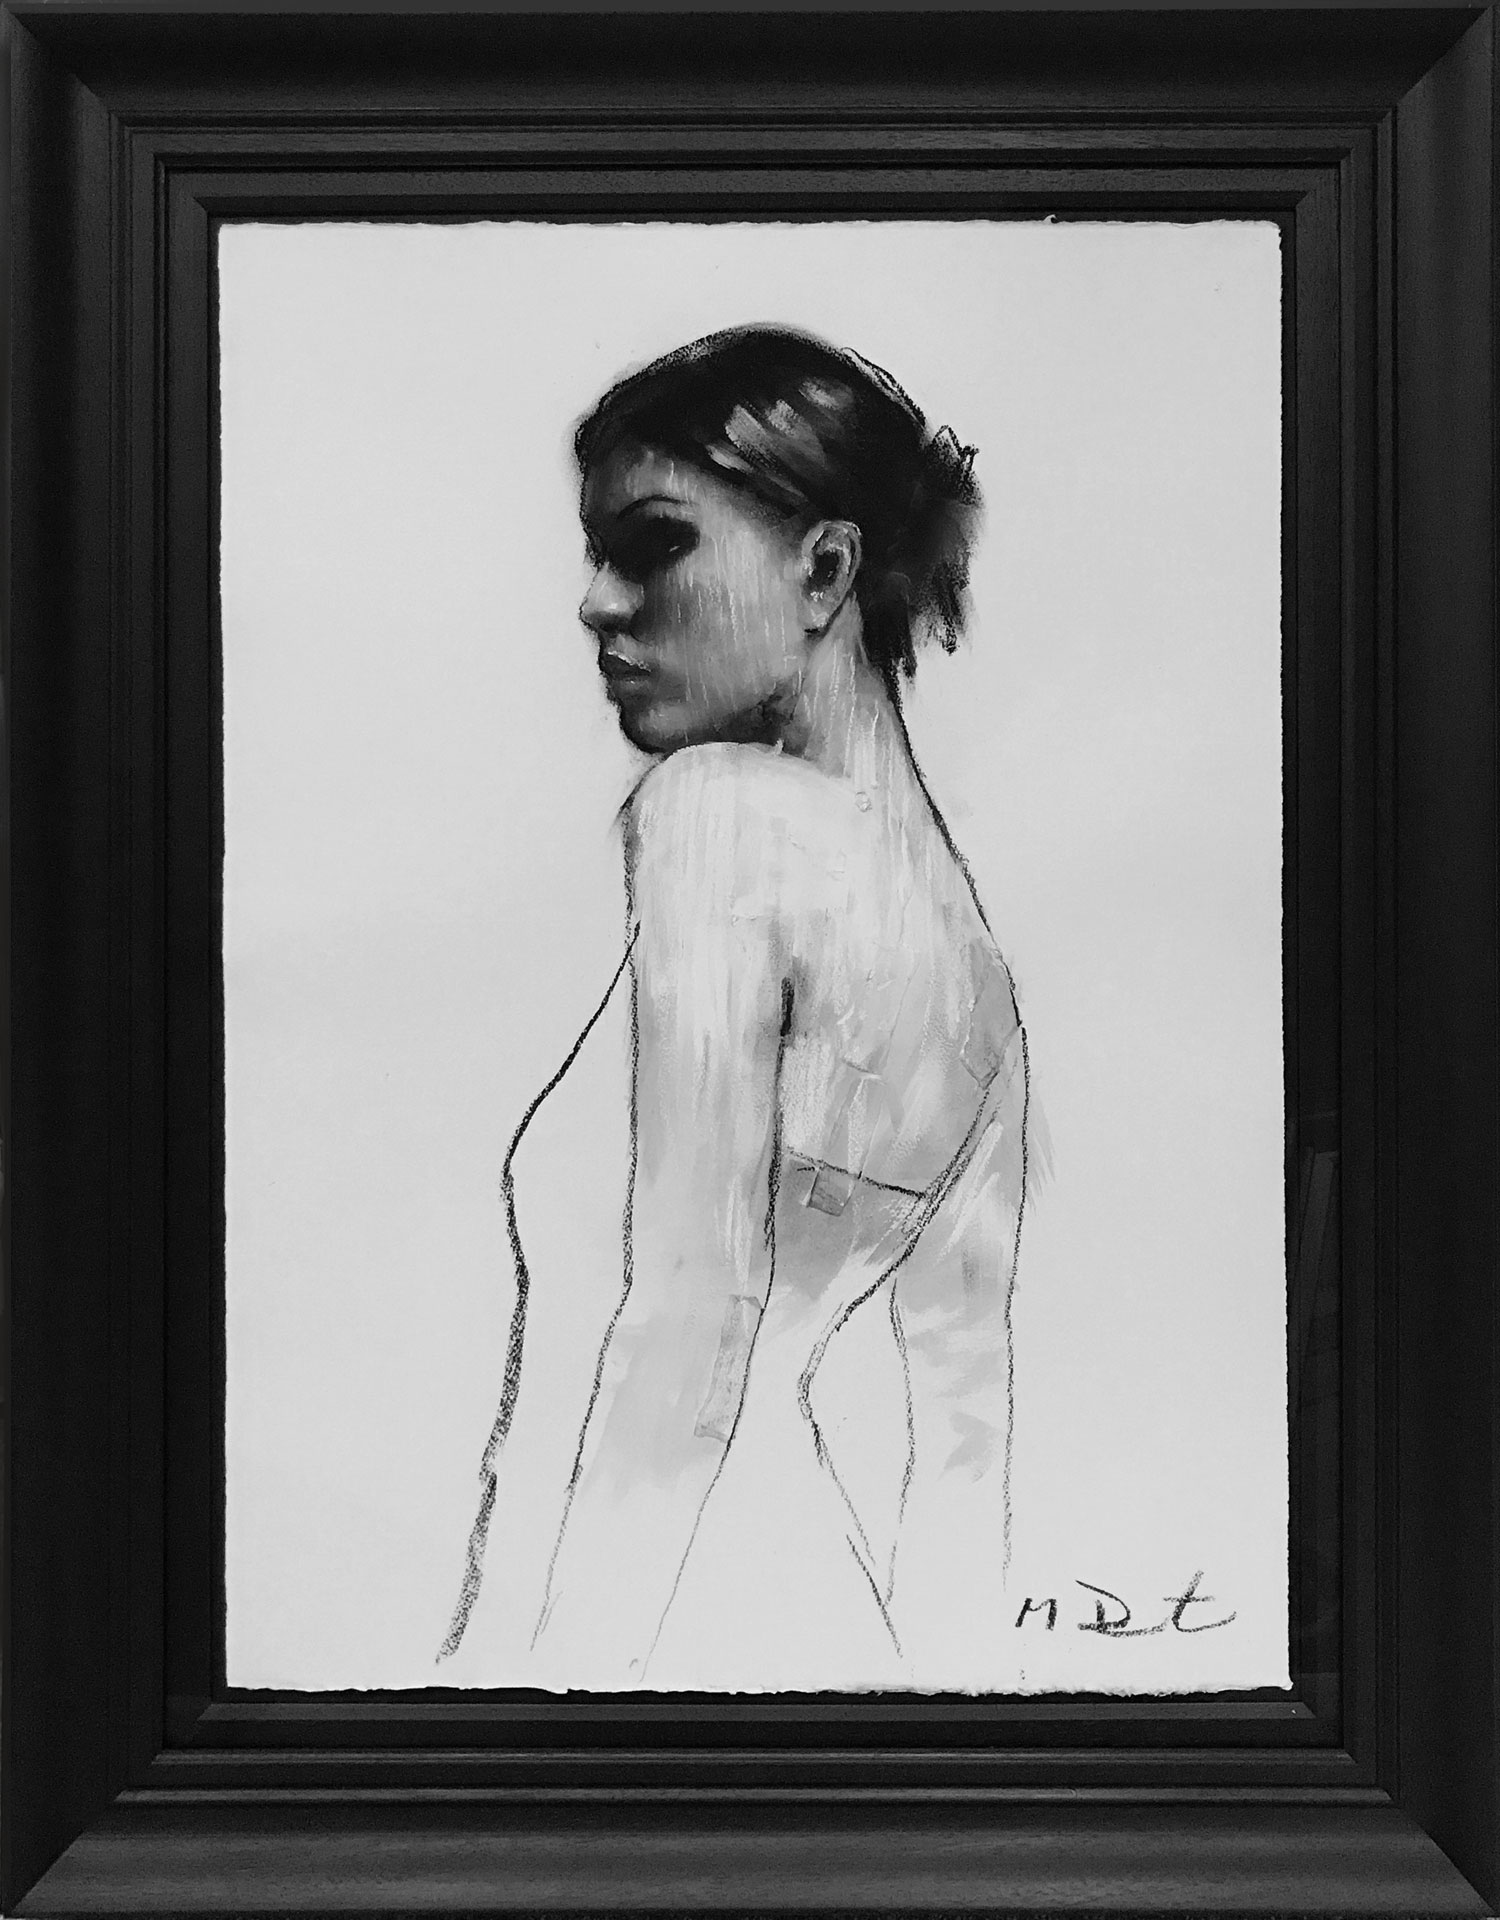 Mark Demsteader Amy Original for sale at Cheshire Art Gallery